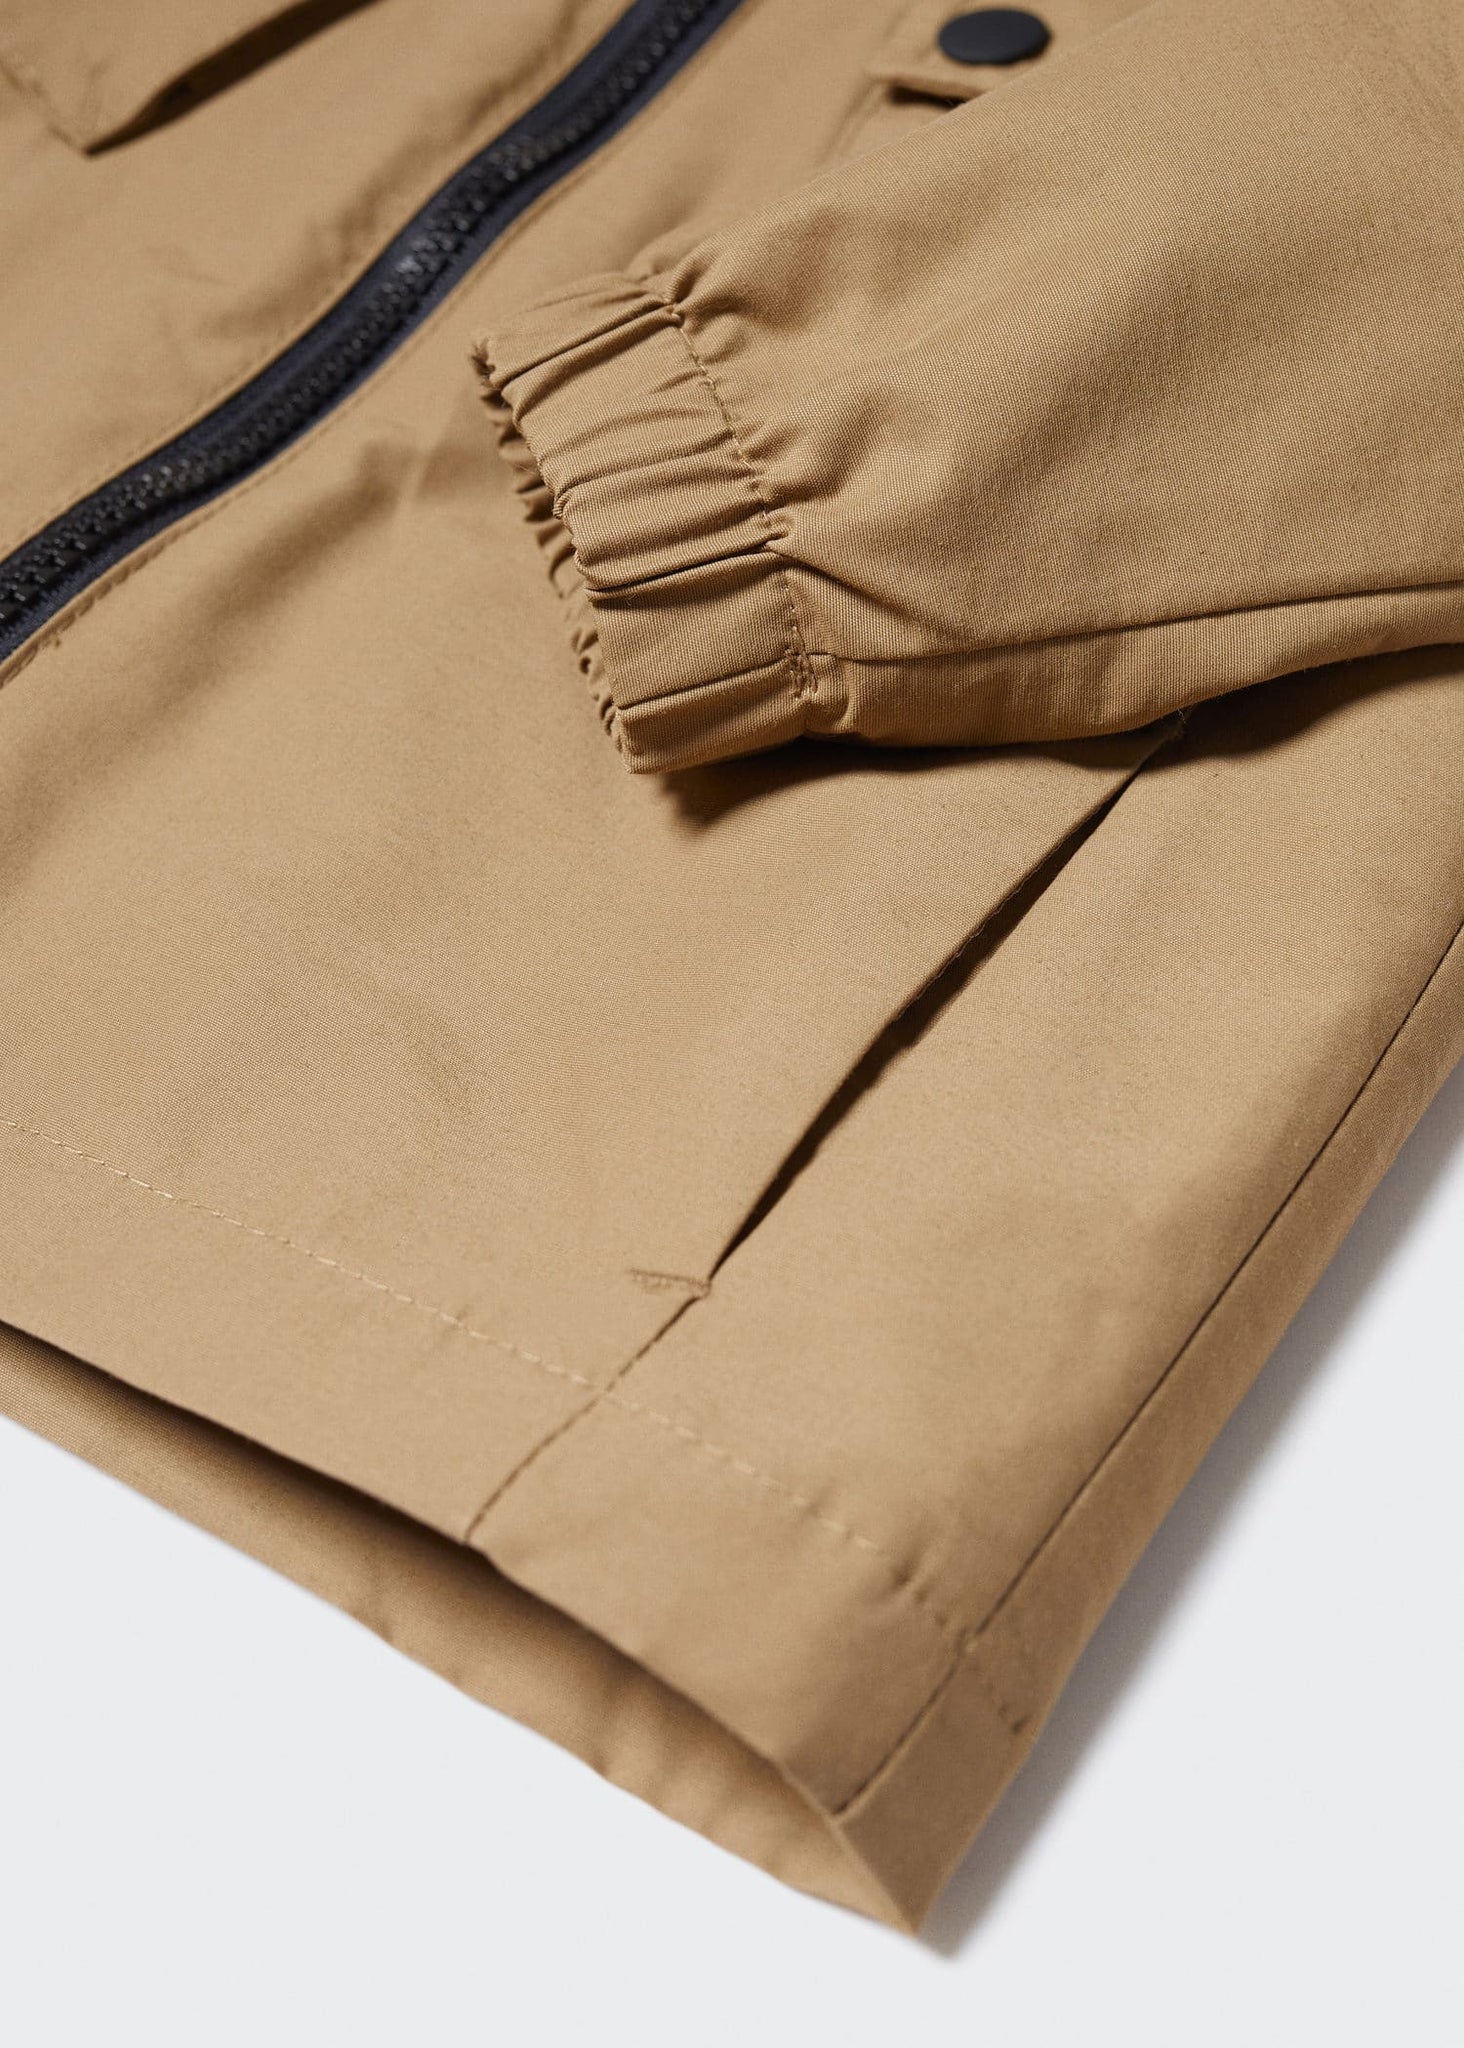 Hooded parka - Details of the article 8